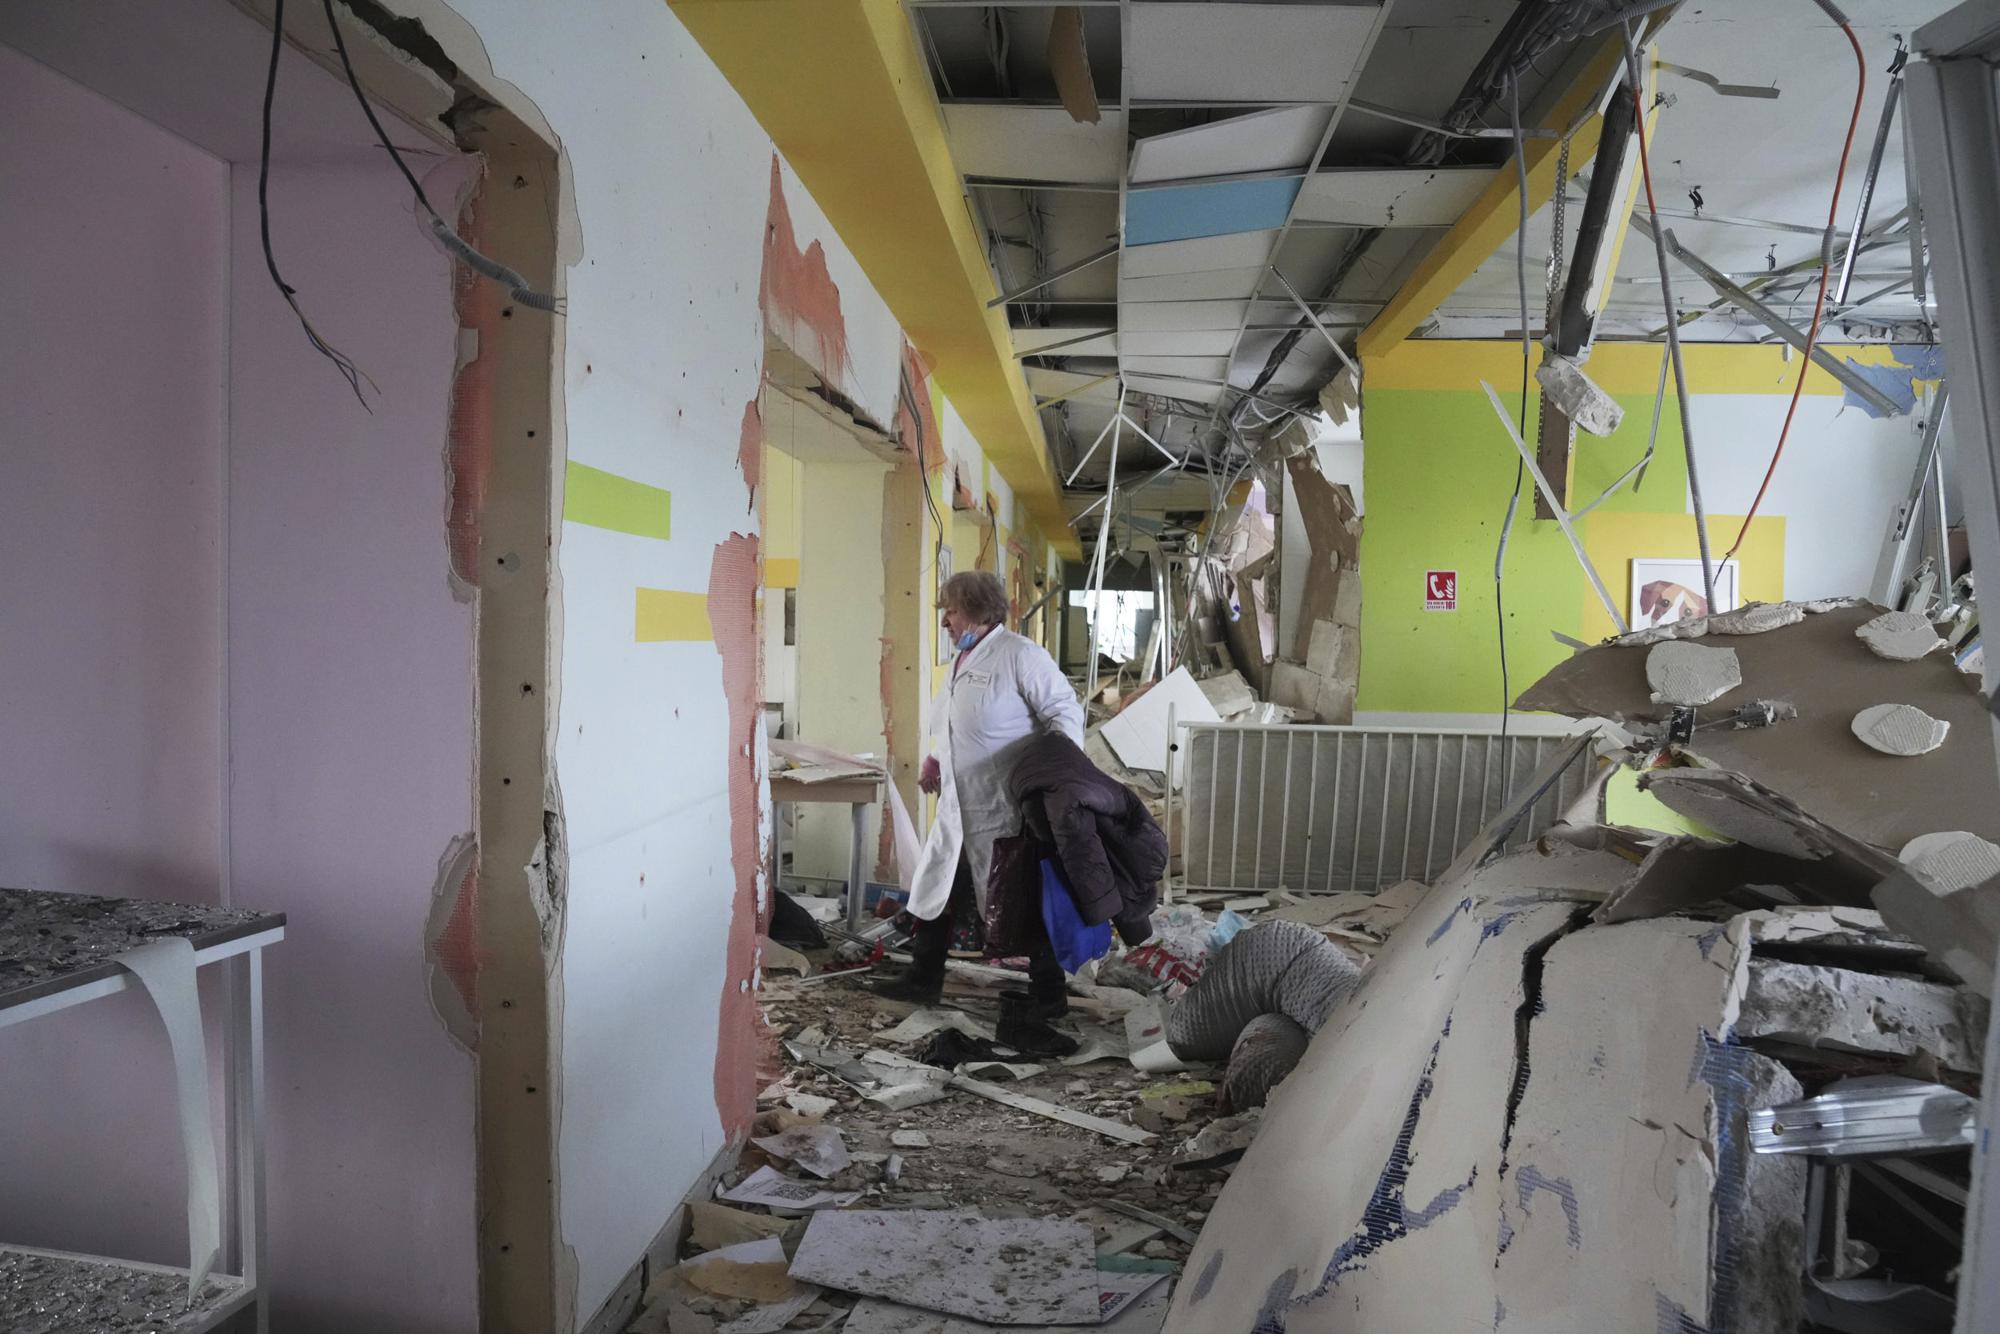 A medical worker walks through the hall of a maternity hospital damaged in a shelling attack in Mariupol, Ukraine, Wednesday, March 9, 2022. Associated Press journalists, who have been reporting from inside blockaded Mariupol since early in the war, documented this attack on the hospital and saw the victims and damage firsthand. They shot video and photos of several bloodstained, pregnant mothers fleeing the blown-out maternity ward, medics shouting, children crying. (AP Photo/Evgeniy Maloletka)